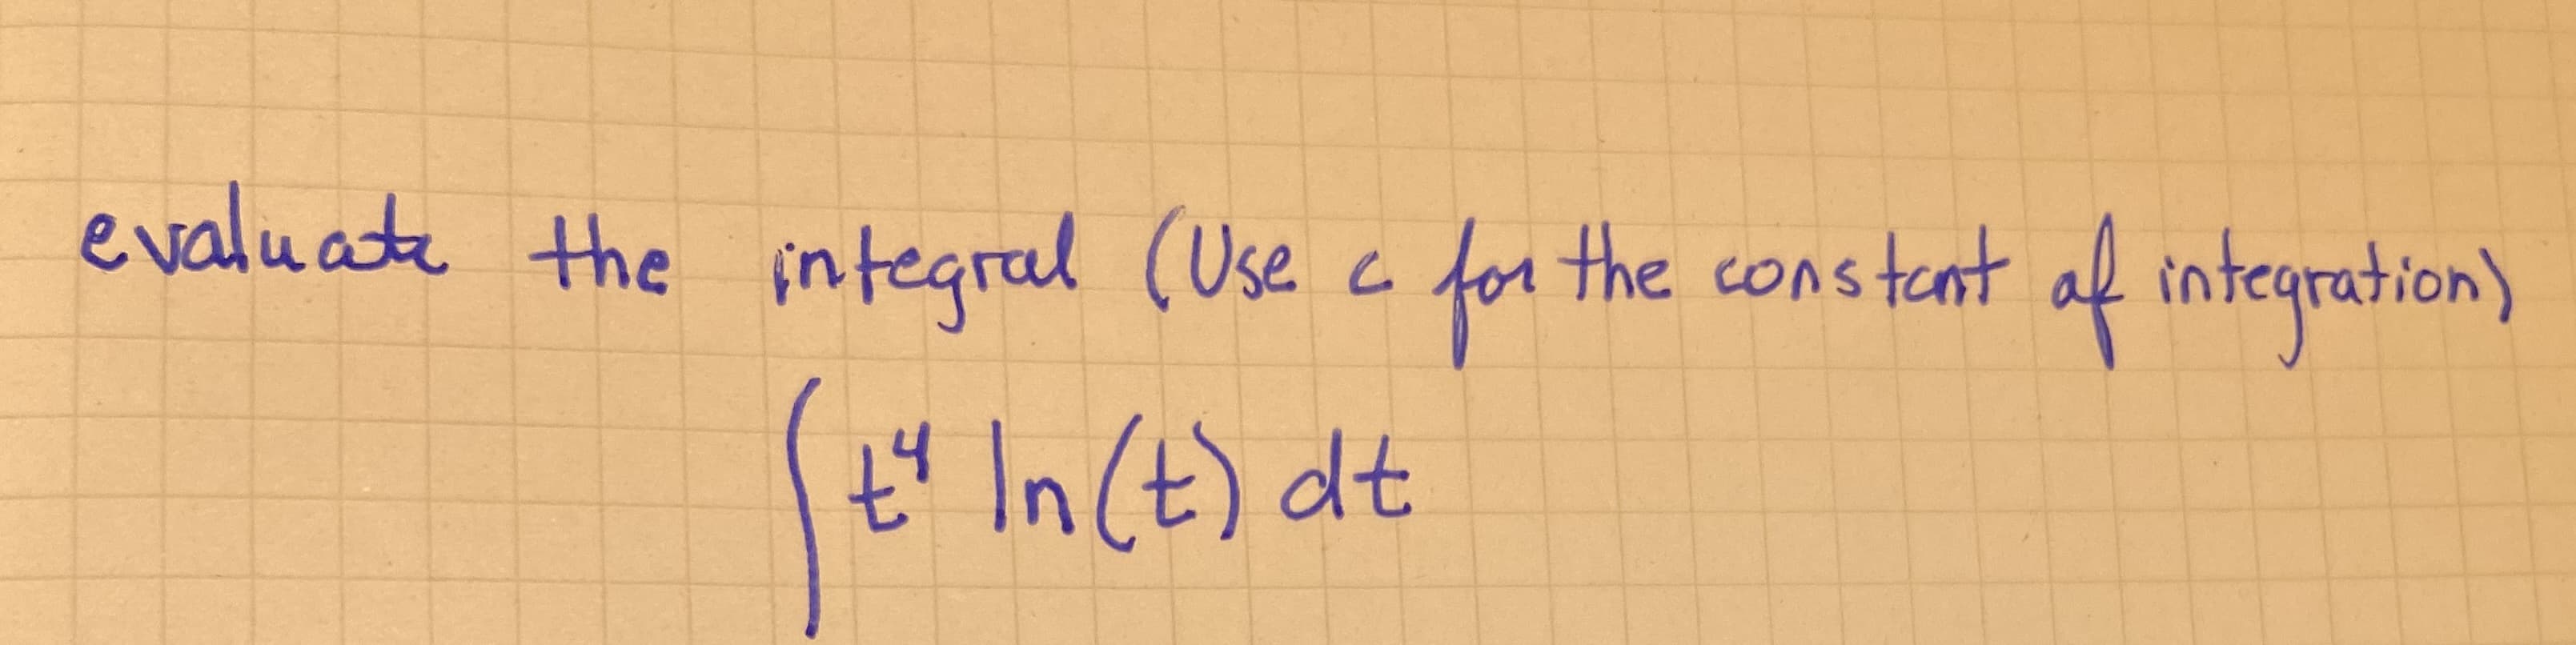 evaluate the integral (Use a for af inteqration)
the constant
tu In (t) dt
